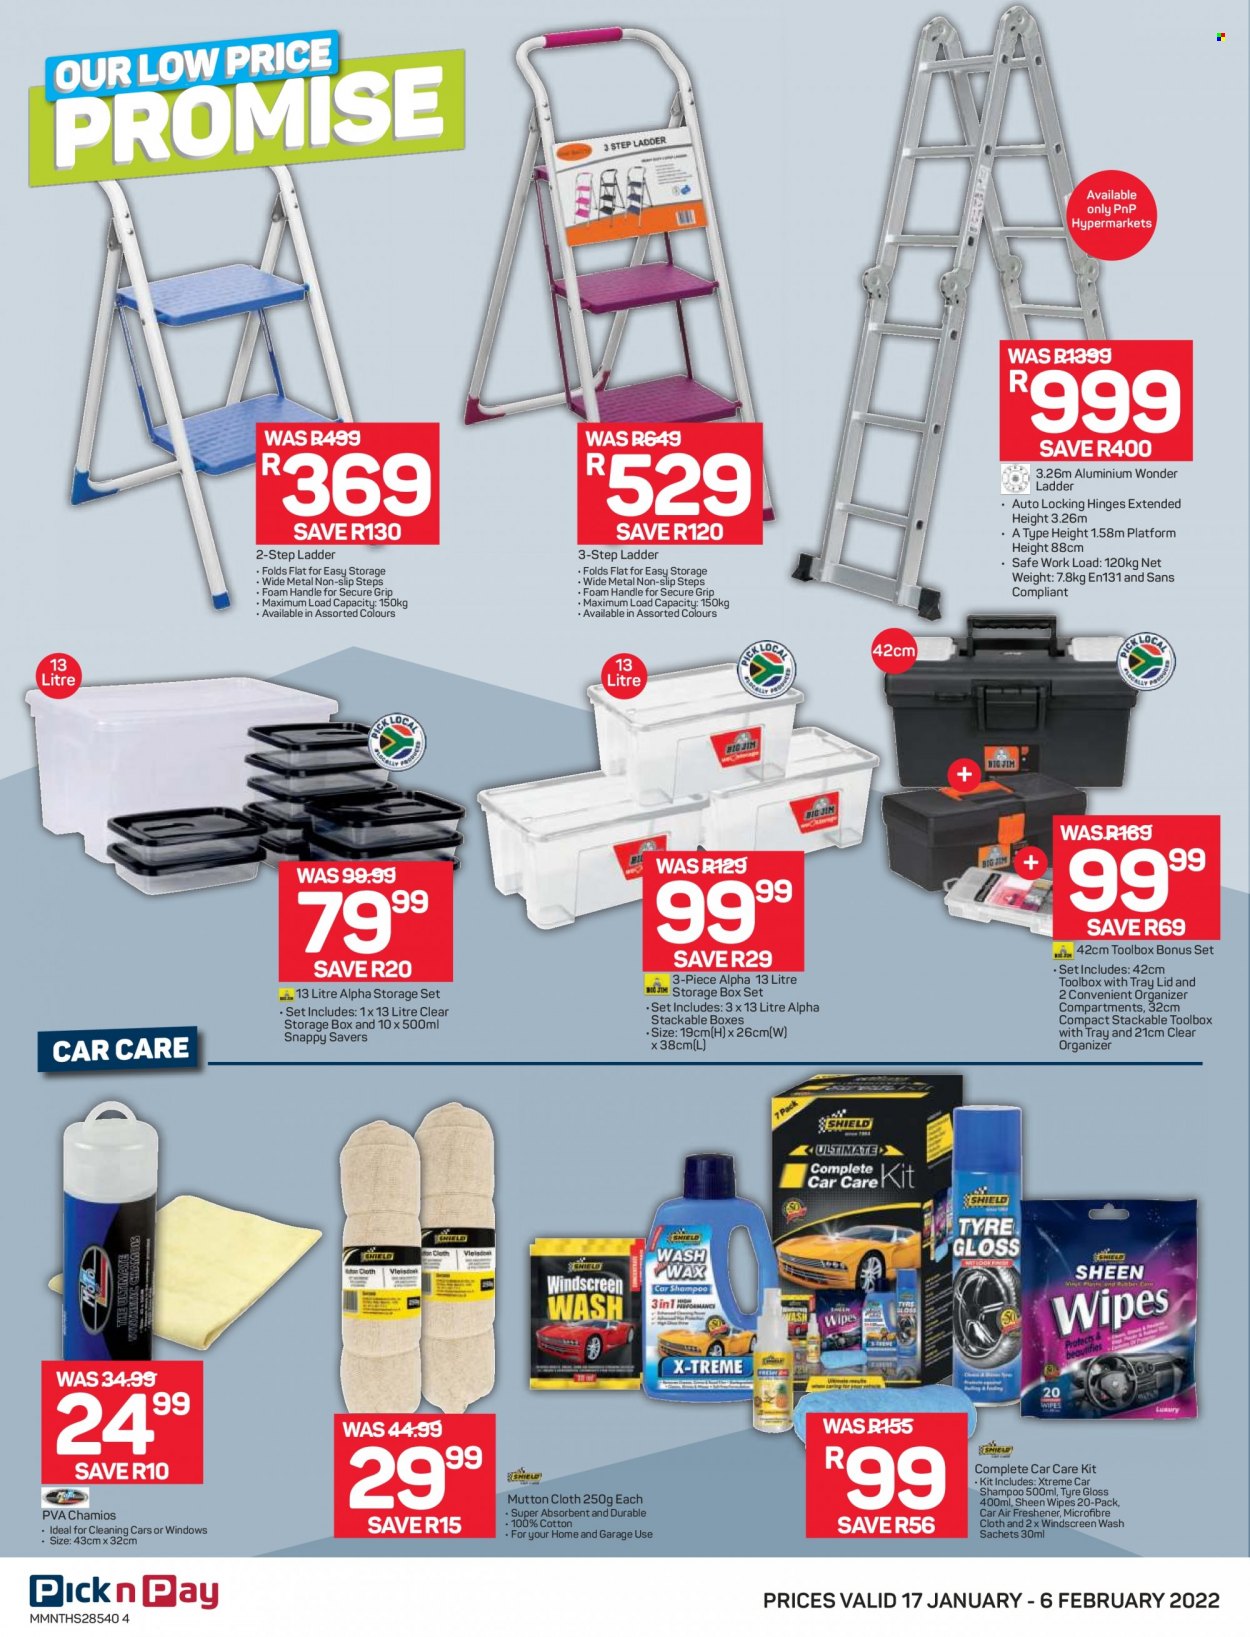 Pick n Pay specials - 01.17.2022 - 02.06.2022. 